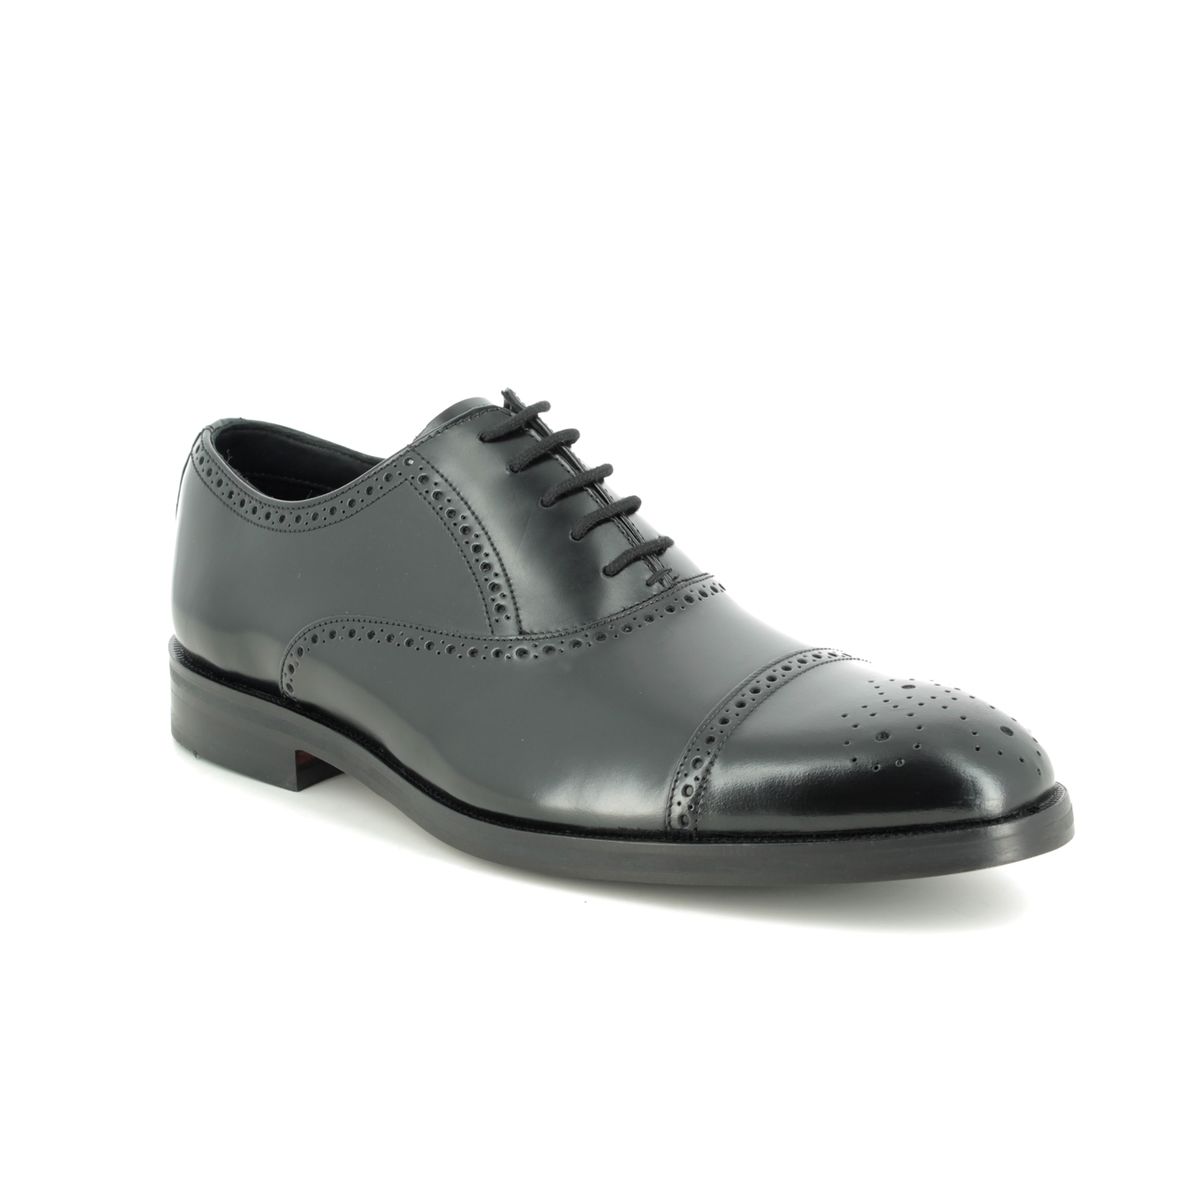 Clarks Oliver Limit Black Leather Mens Brogues 436467G In Size 7 In Plain Black Leather G Width Fitting